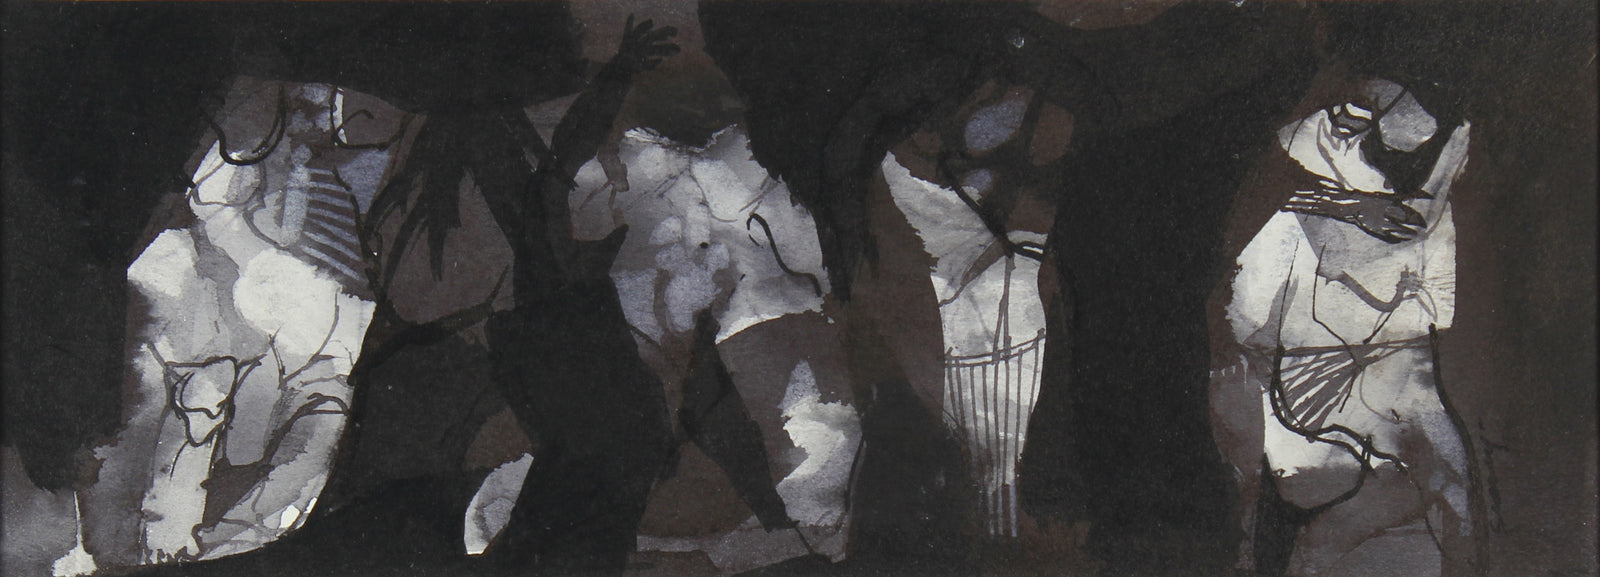 <i>Figures in the Flood</i><br>Mixed Media, 1965<br><br>#0415